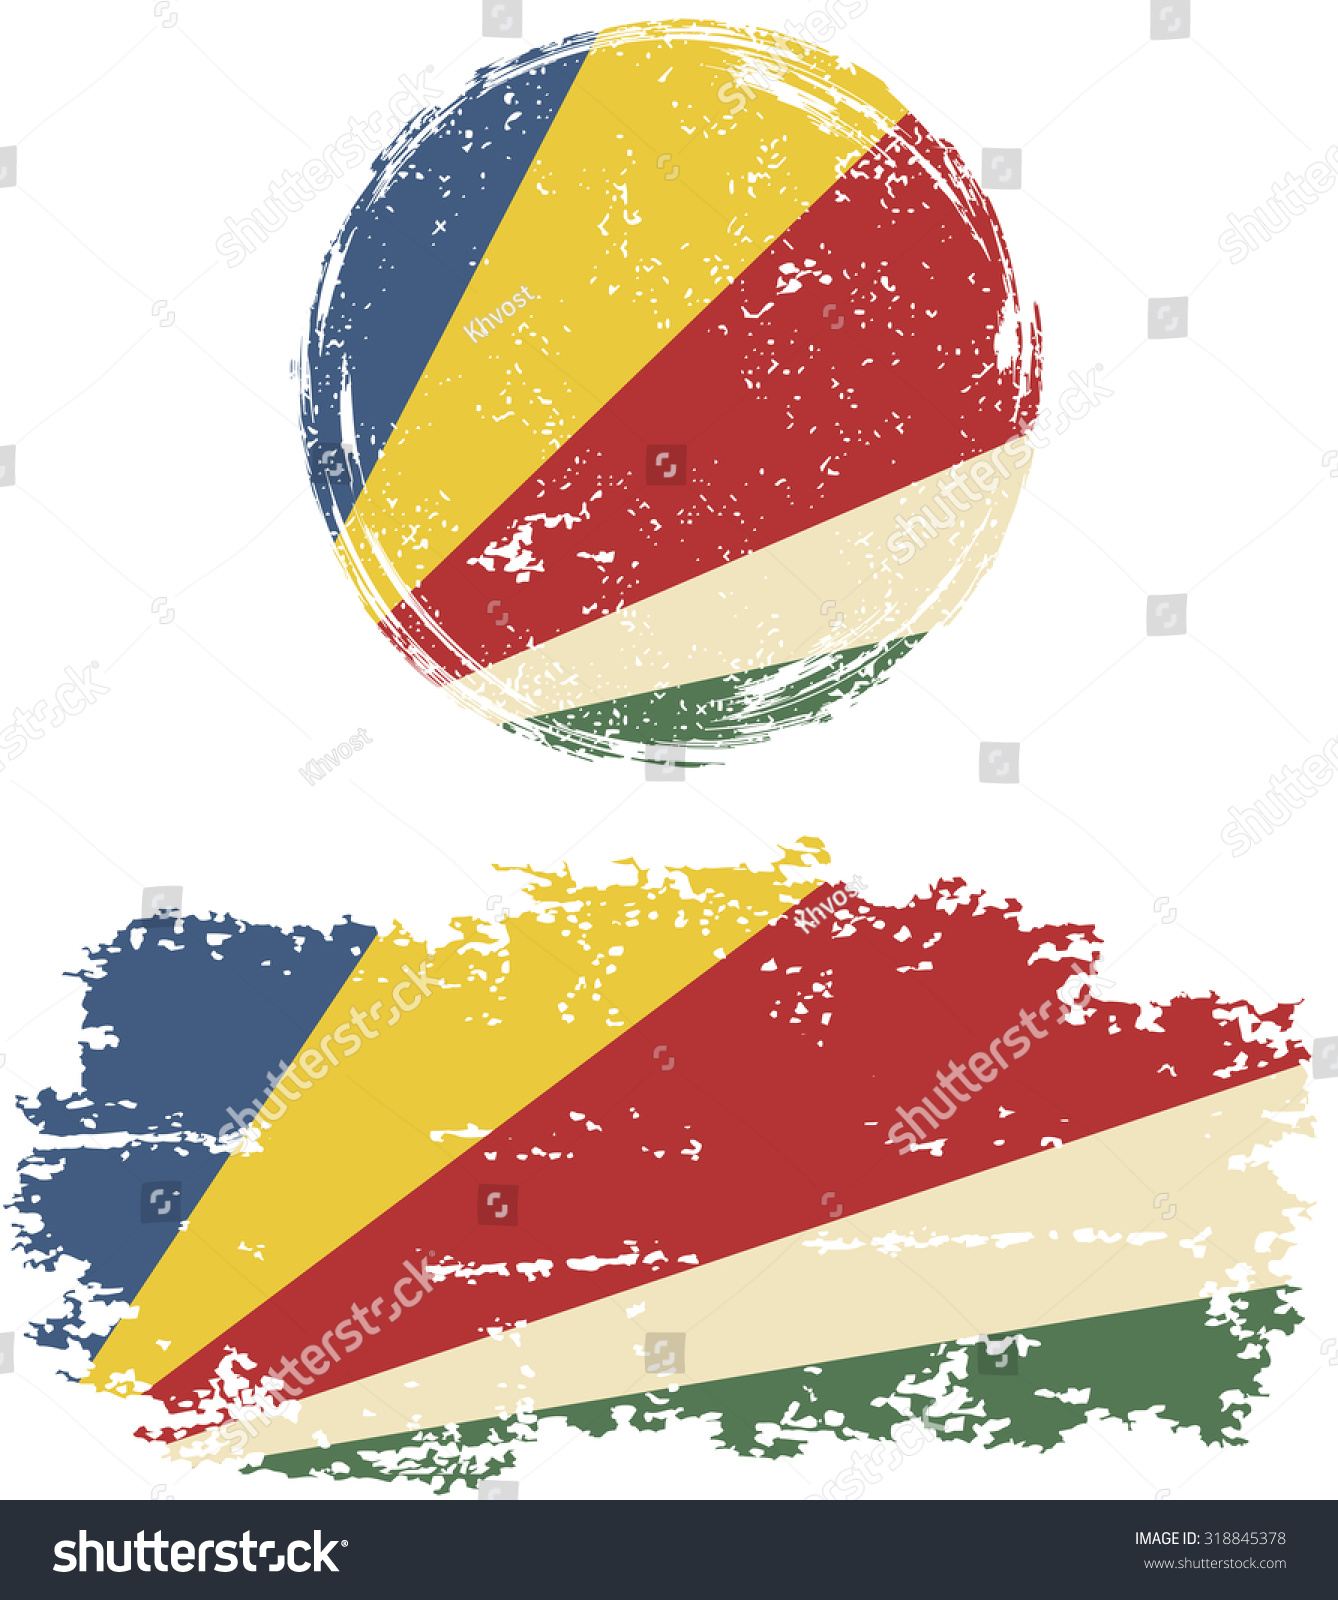 Seychelles Round Square Grunge Flags Vector Stock Vector 318845378 ...